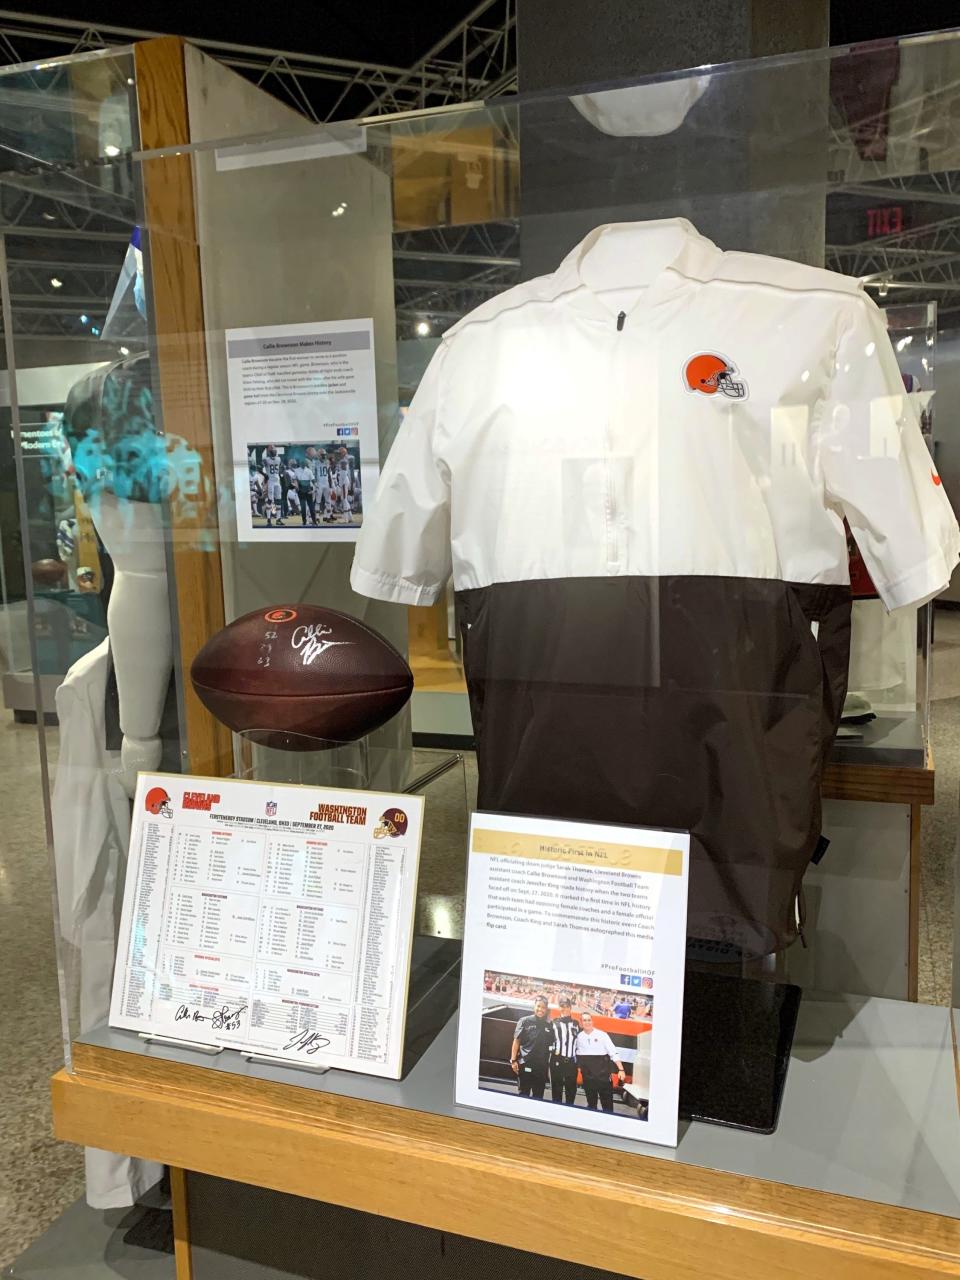 The sideline jacket and autographed game ball from Callie Brownson, the Browns chief of staff and first woman to serve as a position coach in an NFL game.